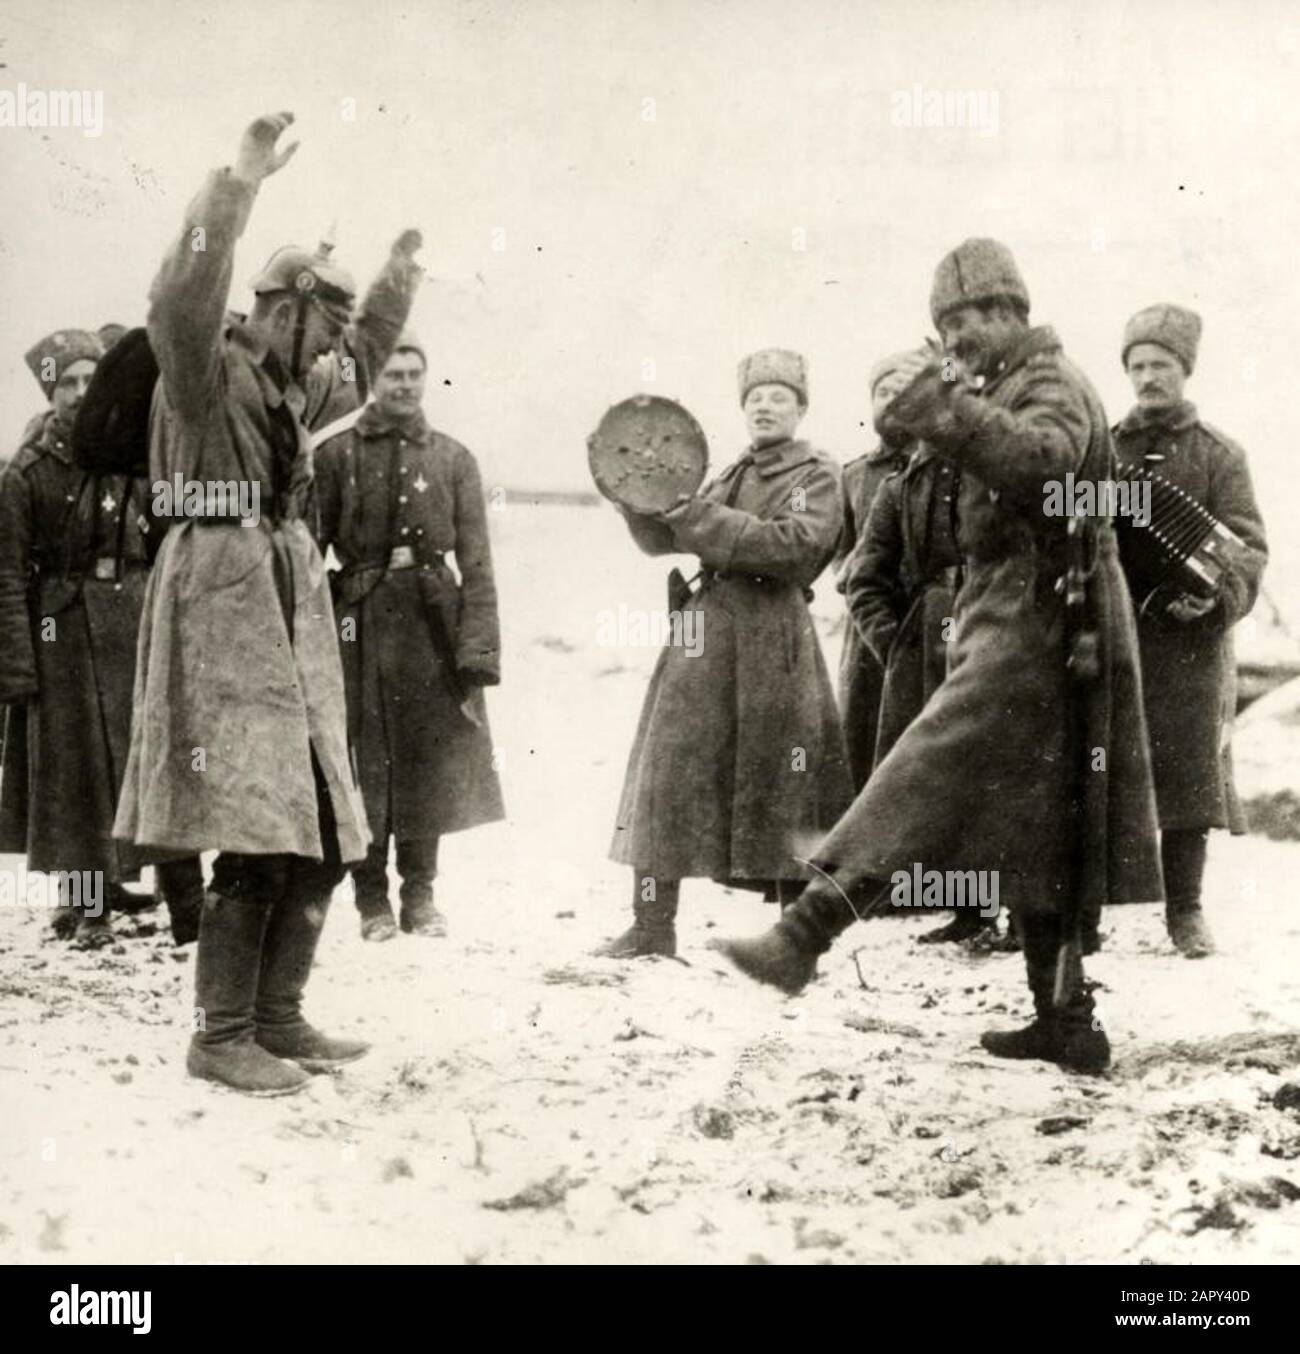 World War I, Russian army. Russians teach the steppe dance to German prisoners of war. Eastern Front, Russia, 1915. Stock Photo